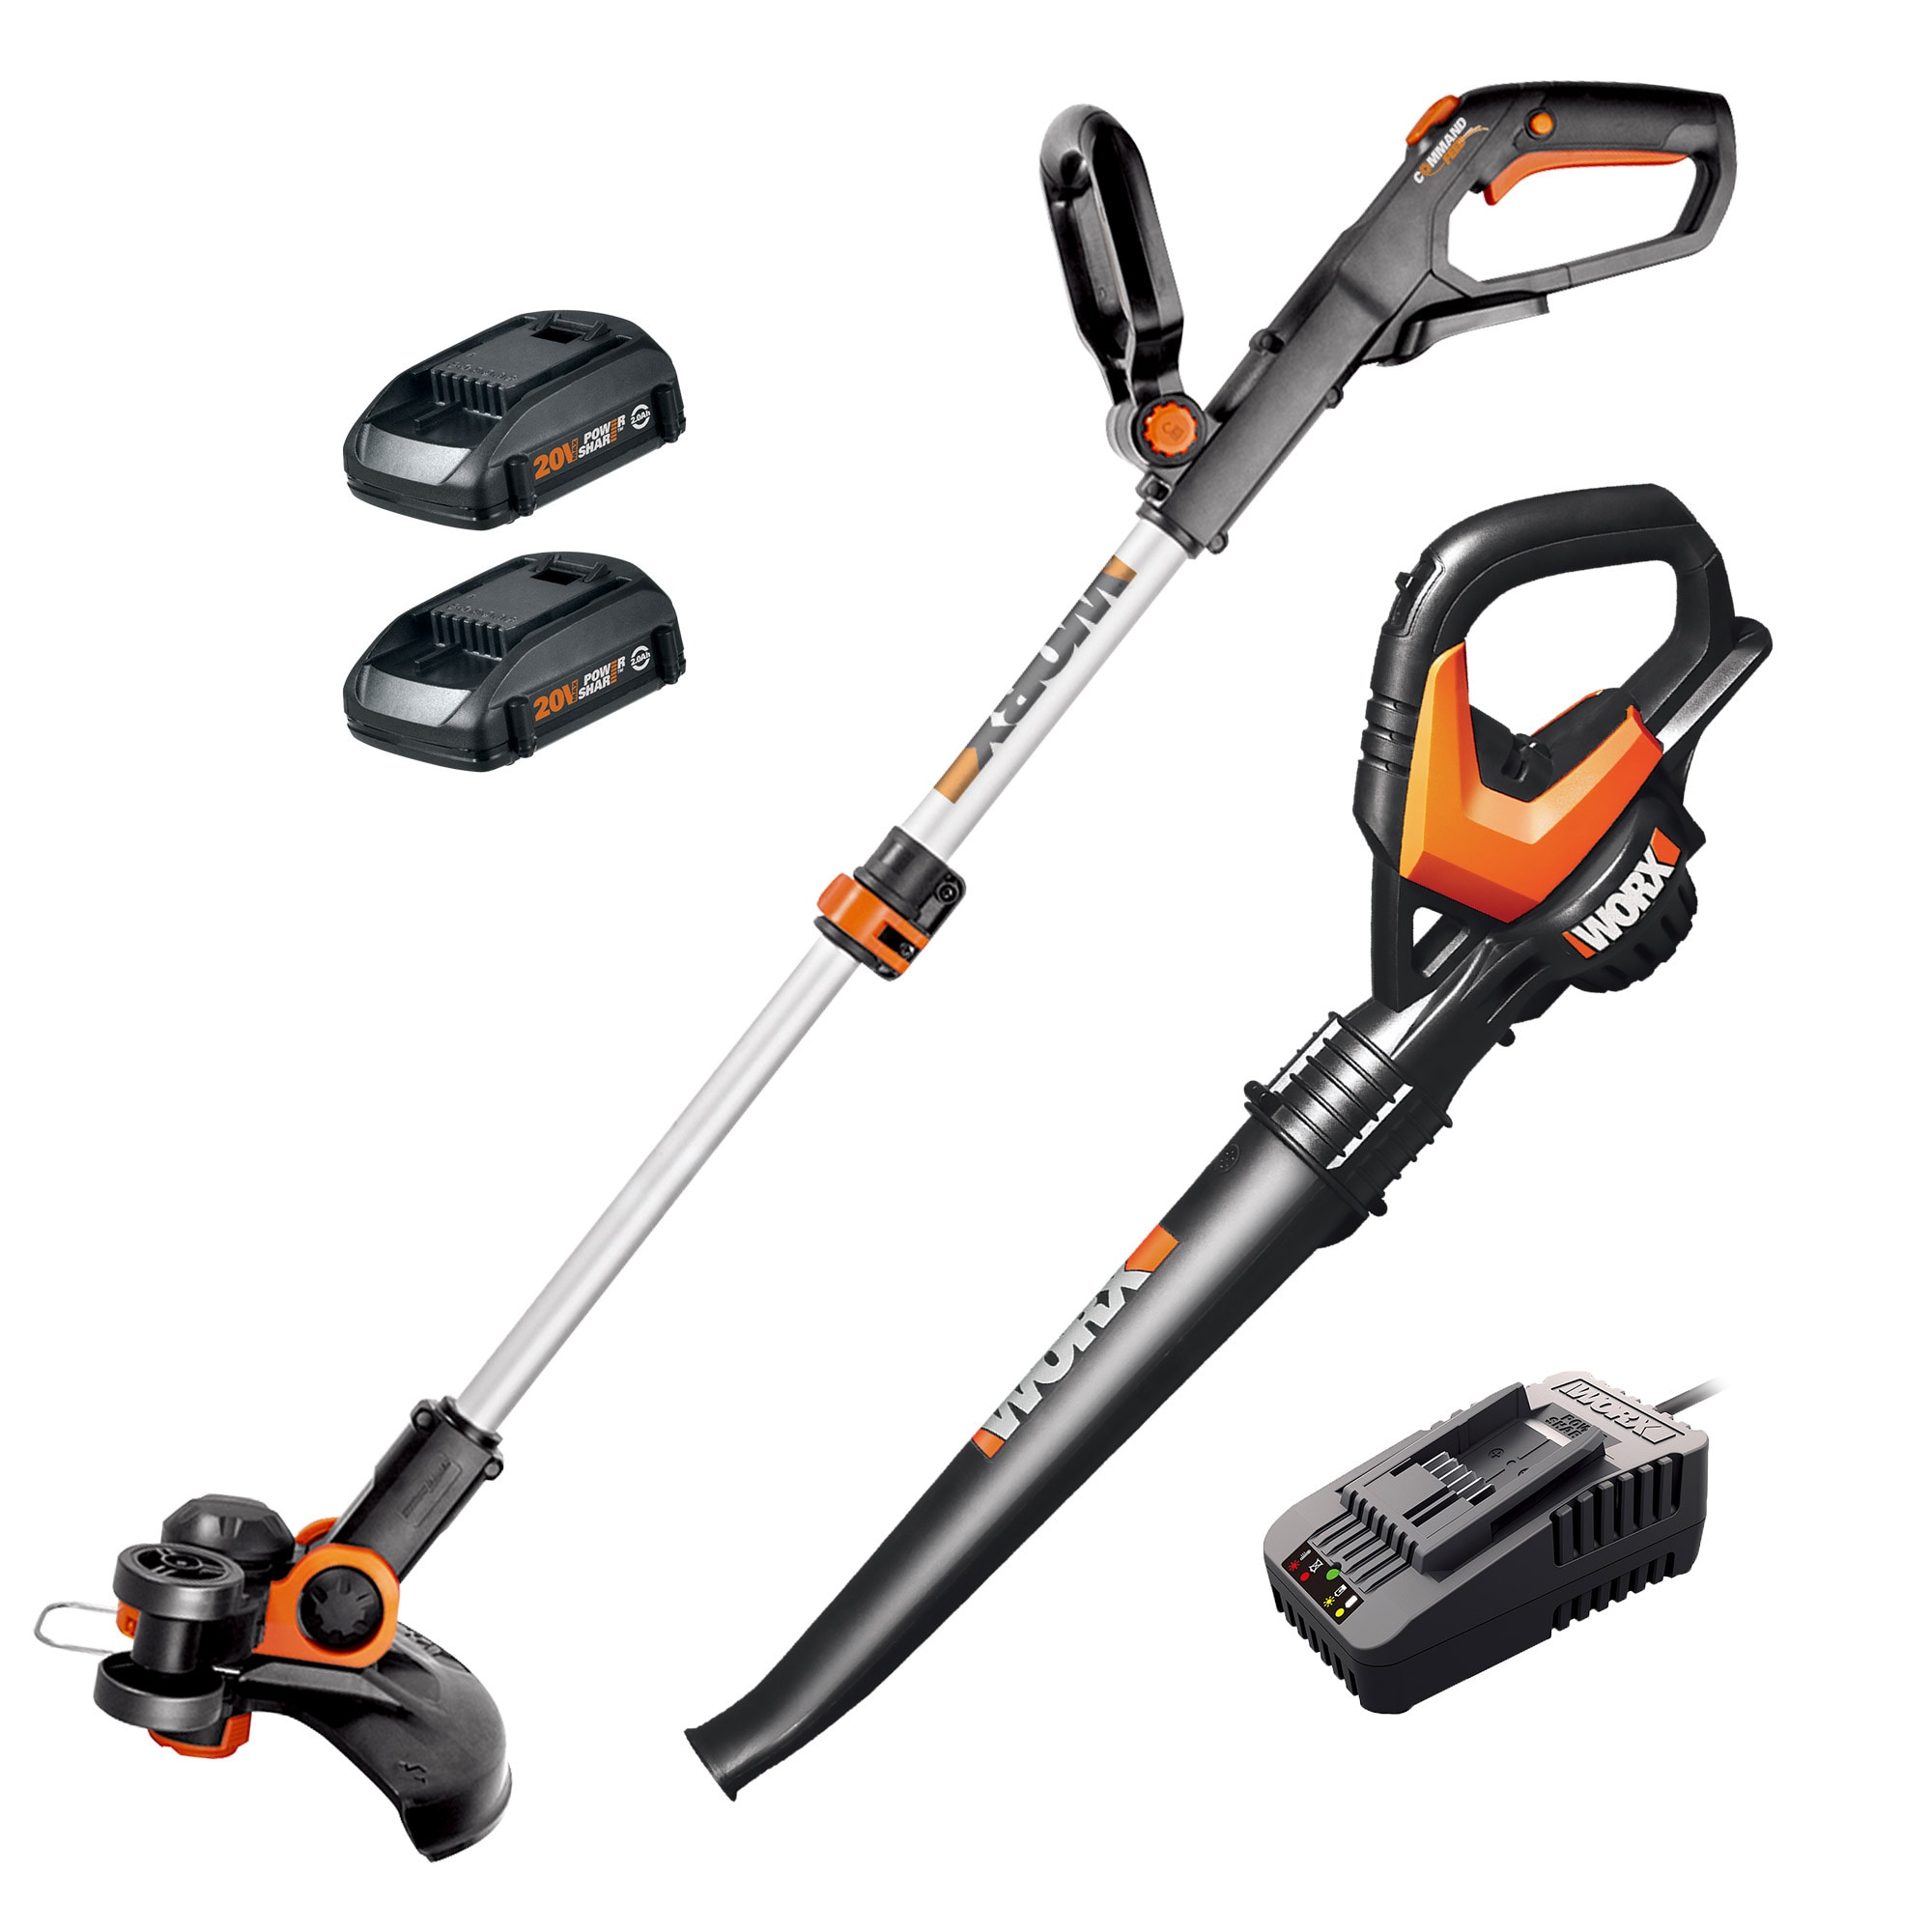 WORX Power Share 2-Piece 20-volt Cordless Power Equipment Combo Kit in the Power Equipment Combo Kits at Lowes.com